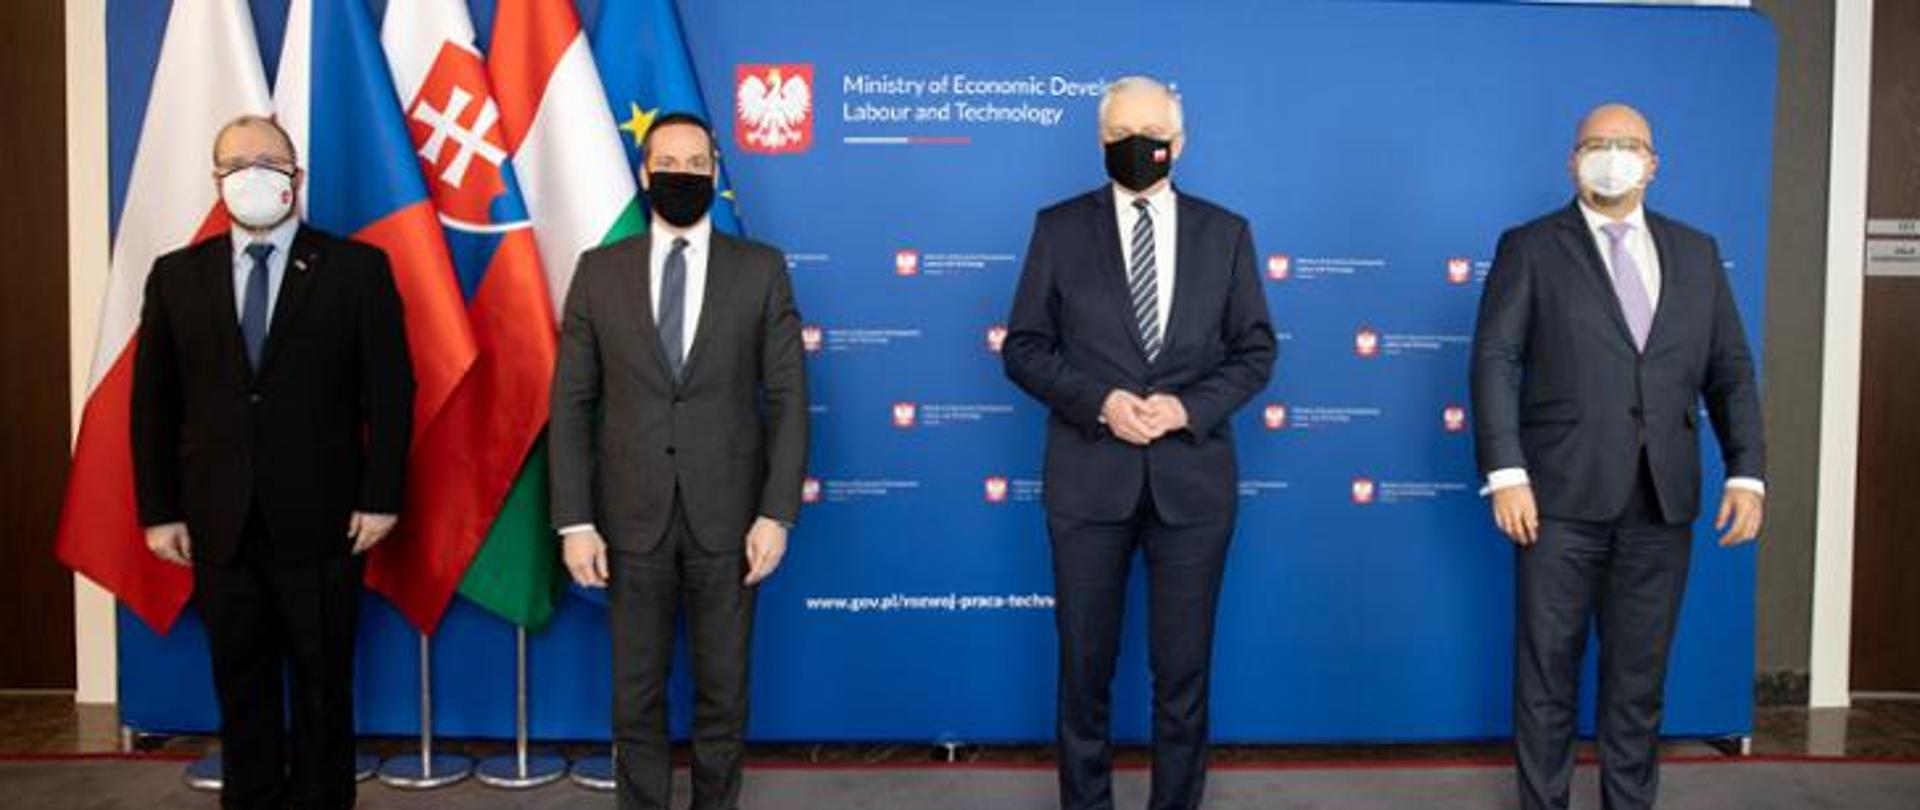 Prime Minister Jarosław Gowin met the ambassadors of the Visegrad Group countries group picture